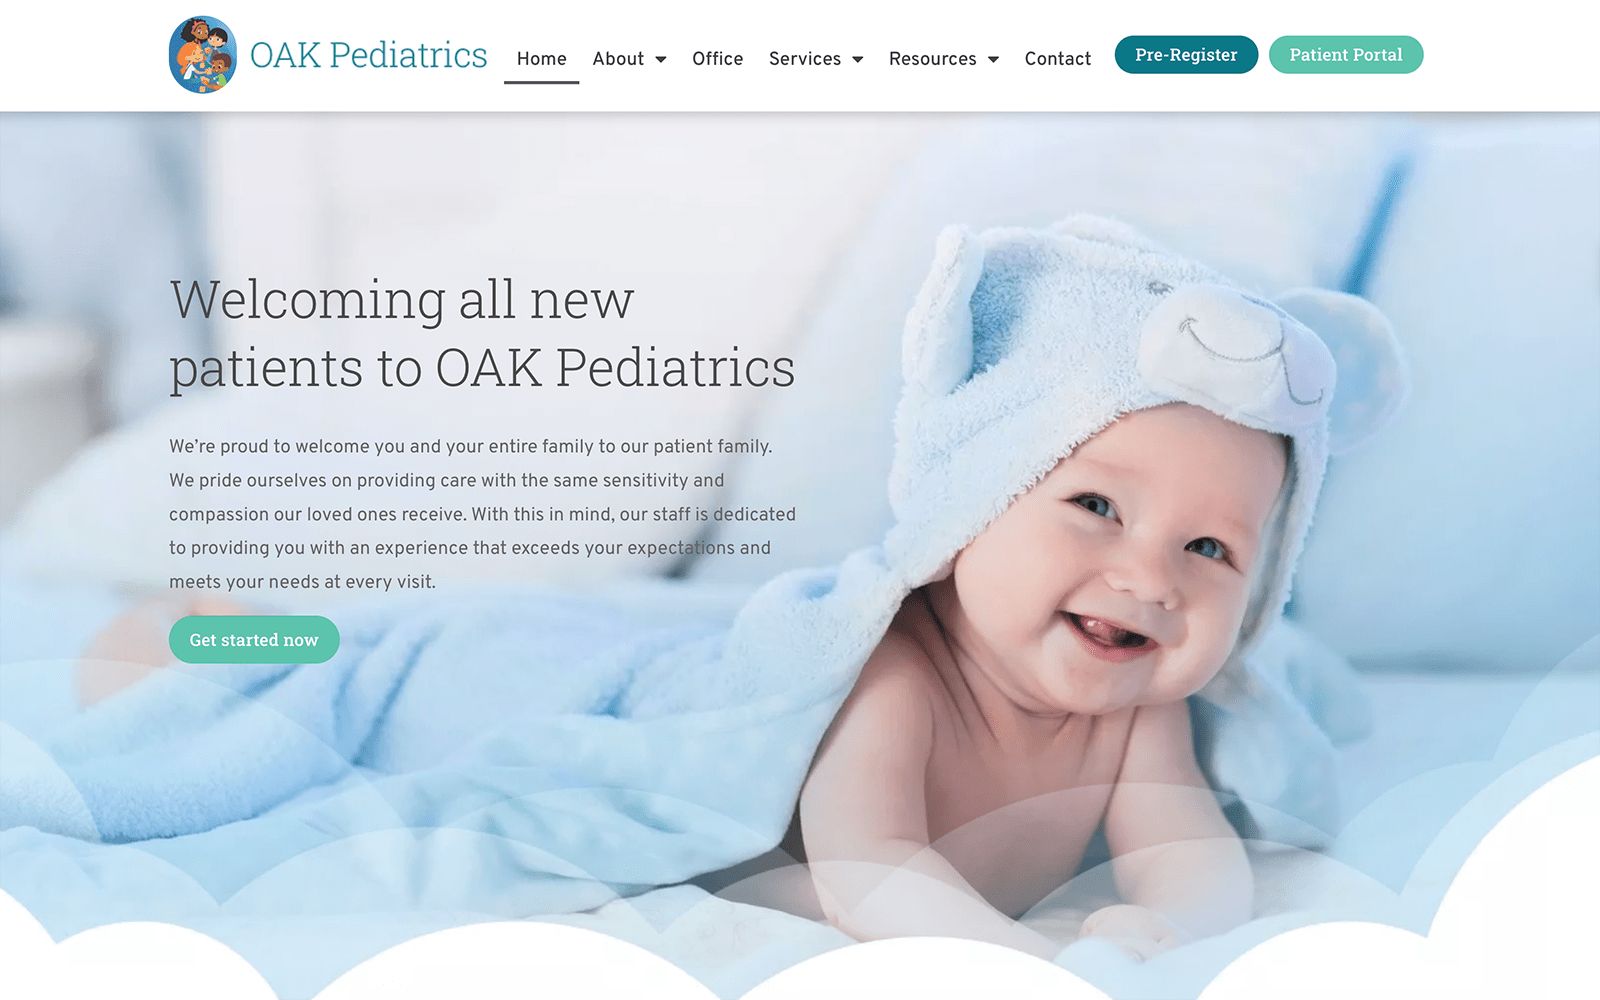 Website with Baby Photo